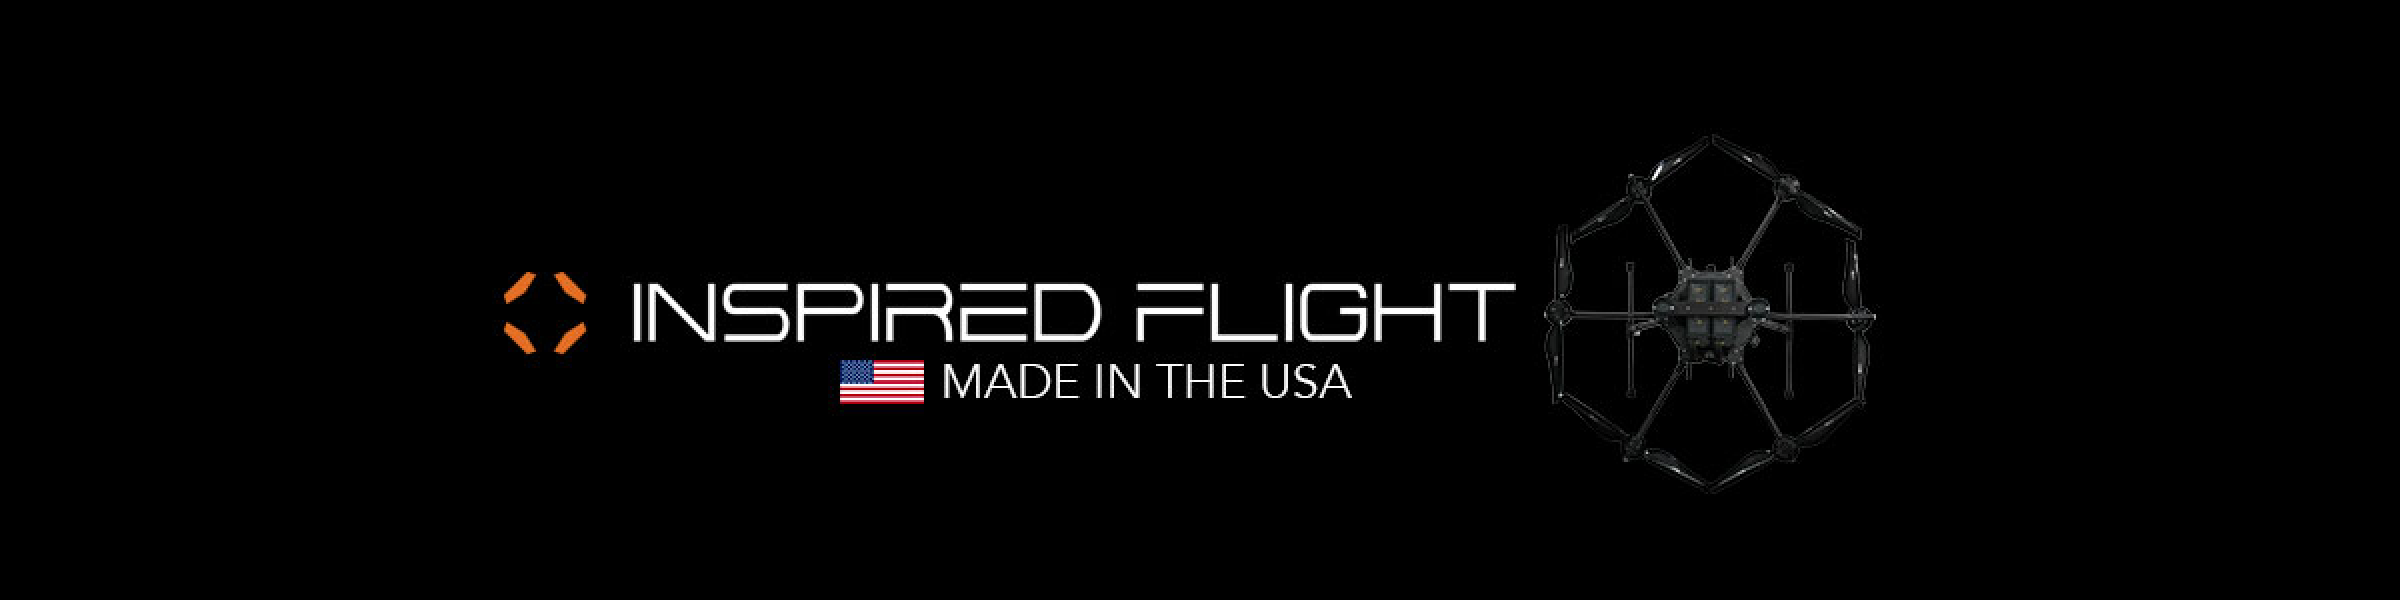 Inspired Flight - made in the USA